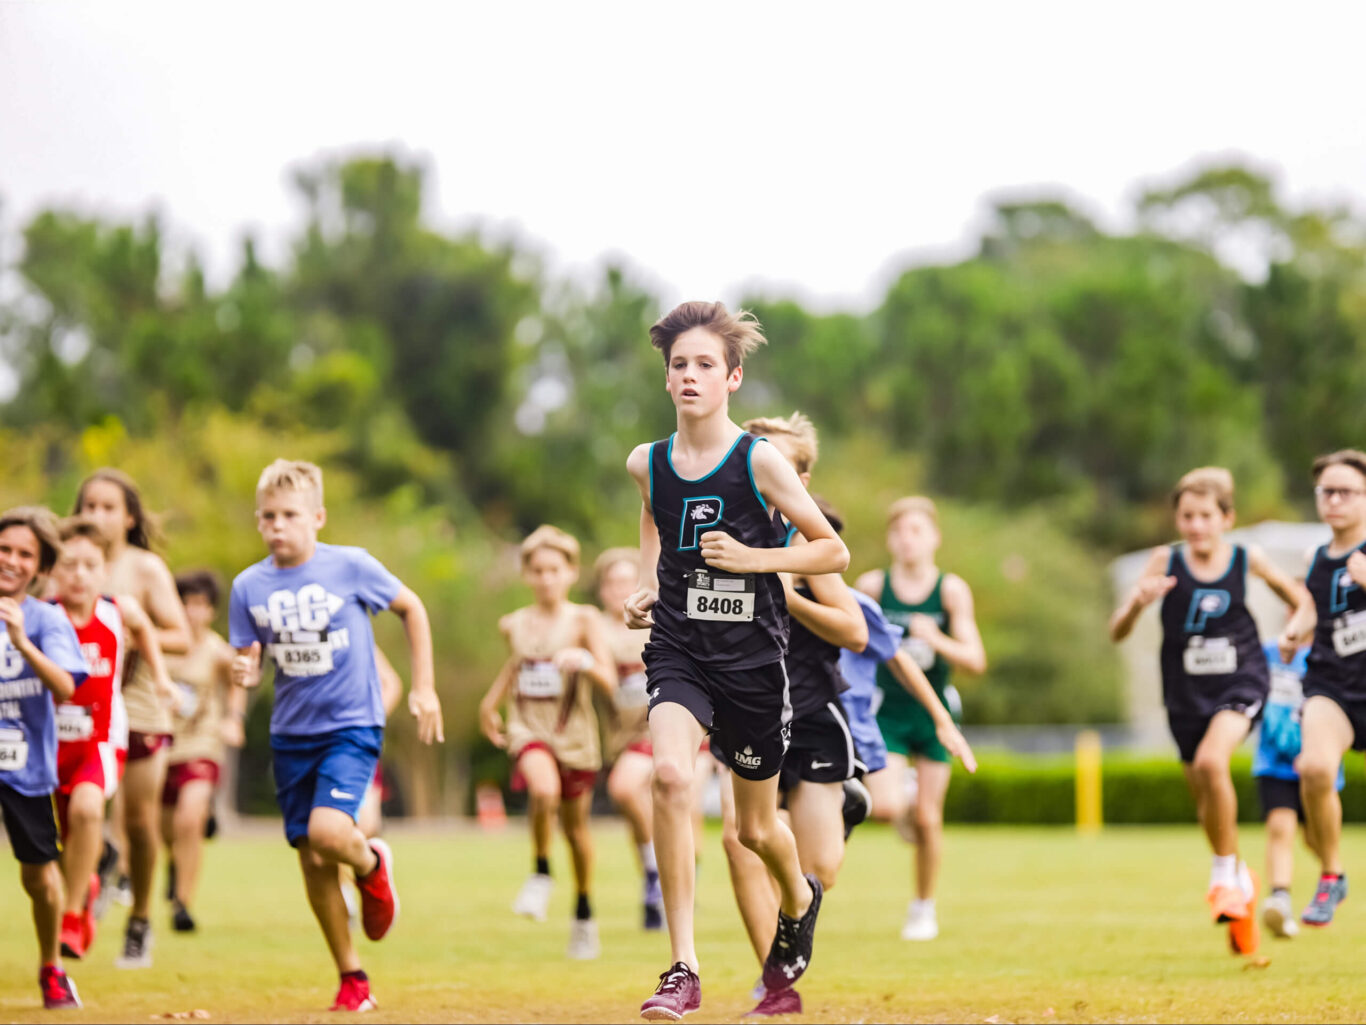 A group of boys competing in a cross country race.